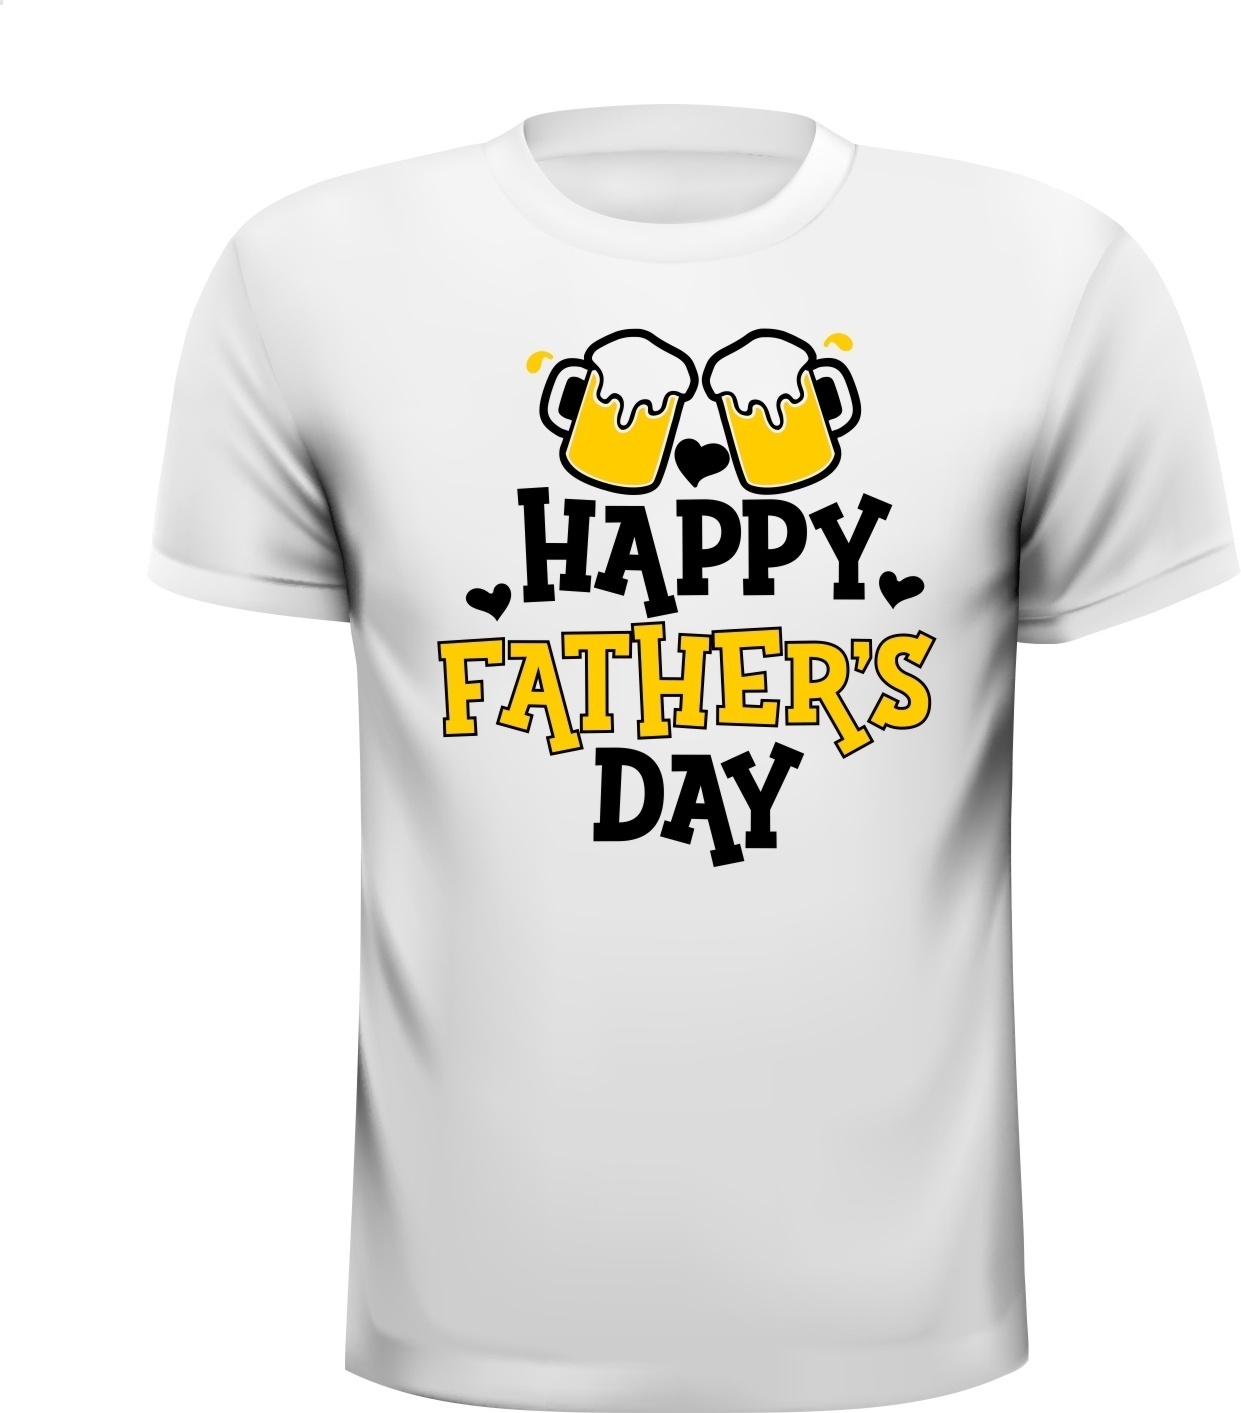 Happy fathers day fijne vaderdag t-shirt